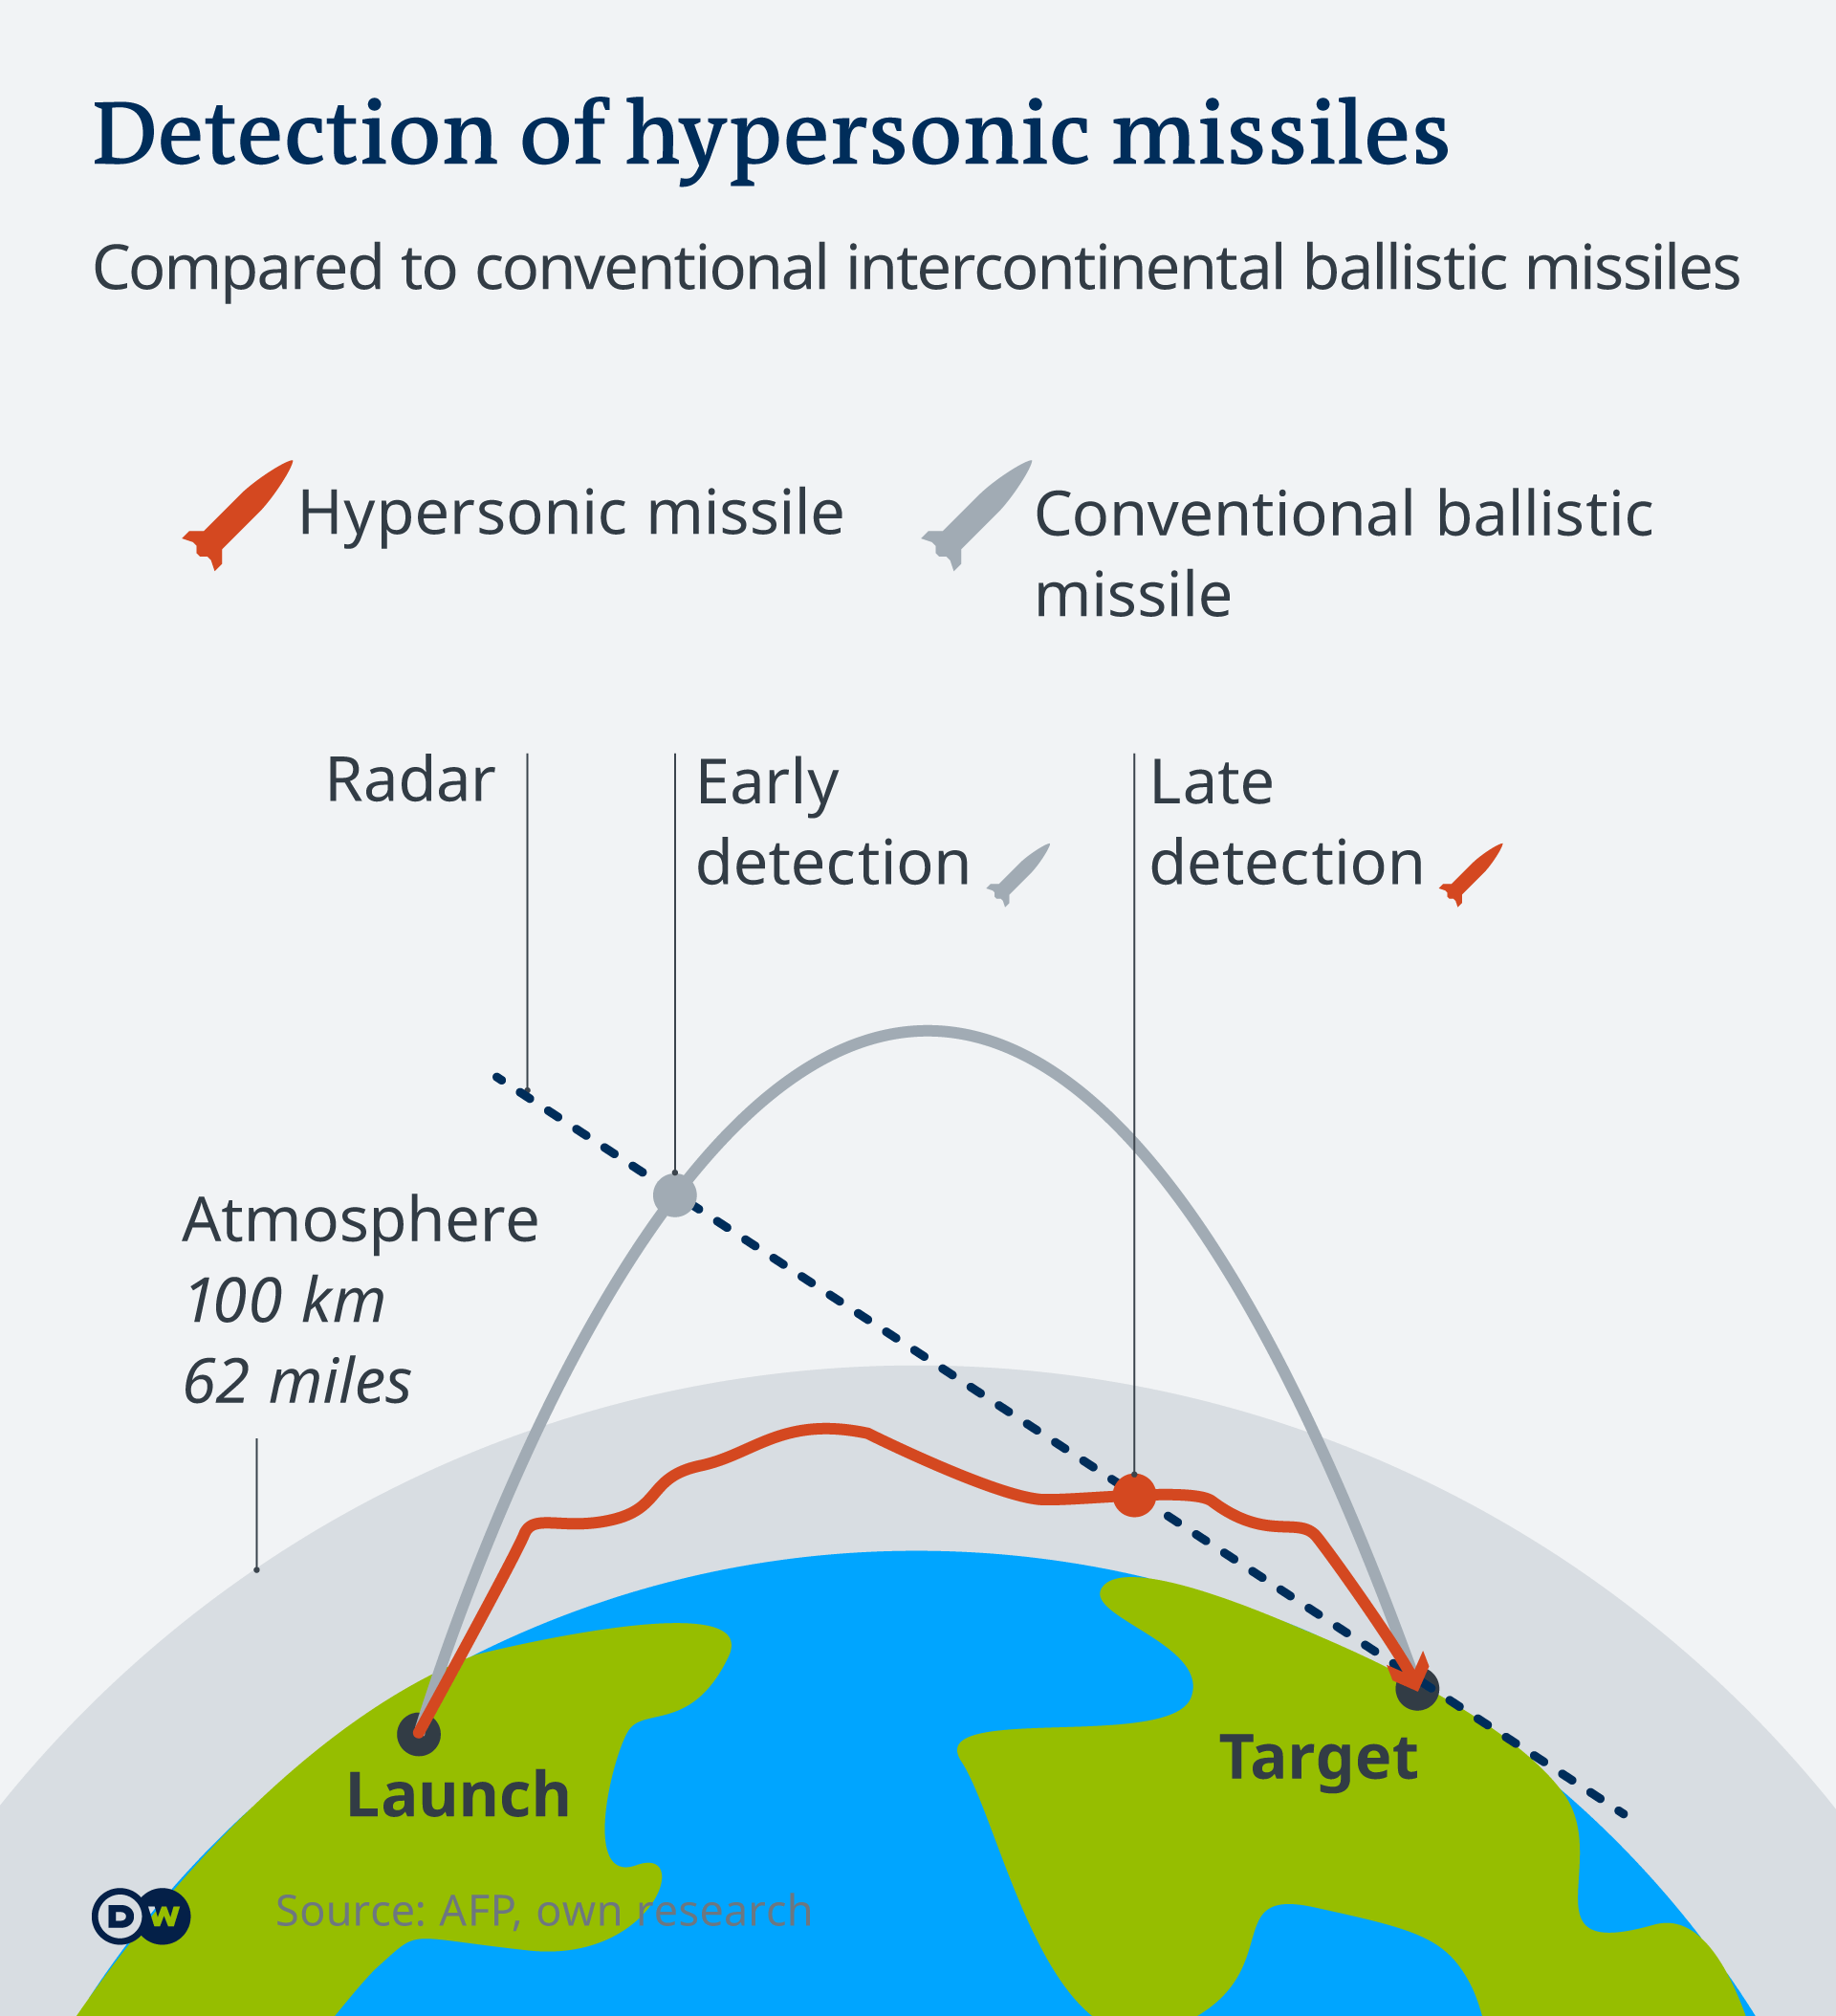 Infographic illustrating how hypersonic missiles fly and avoid detection until later than compared to conventional intercontinental ballistic missiles